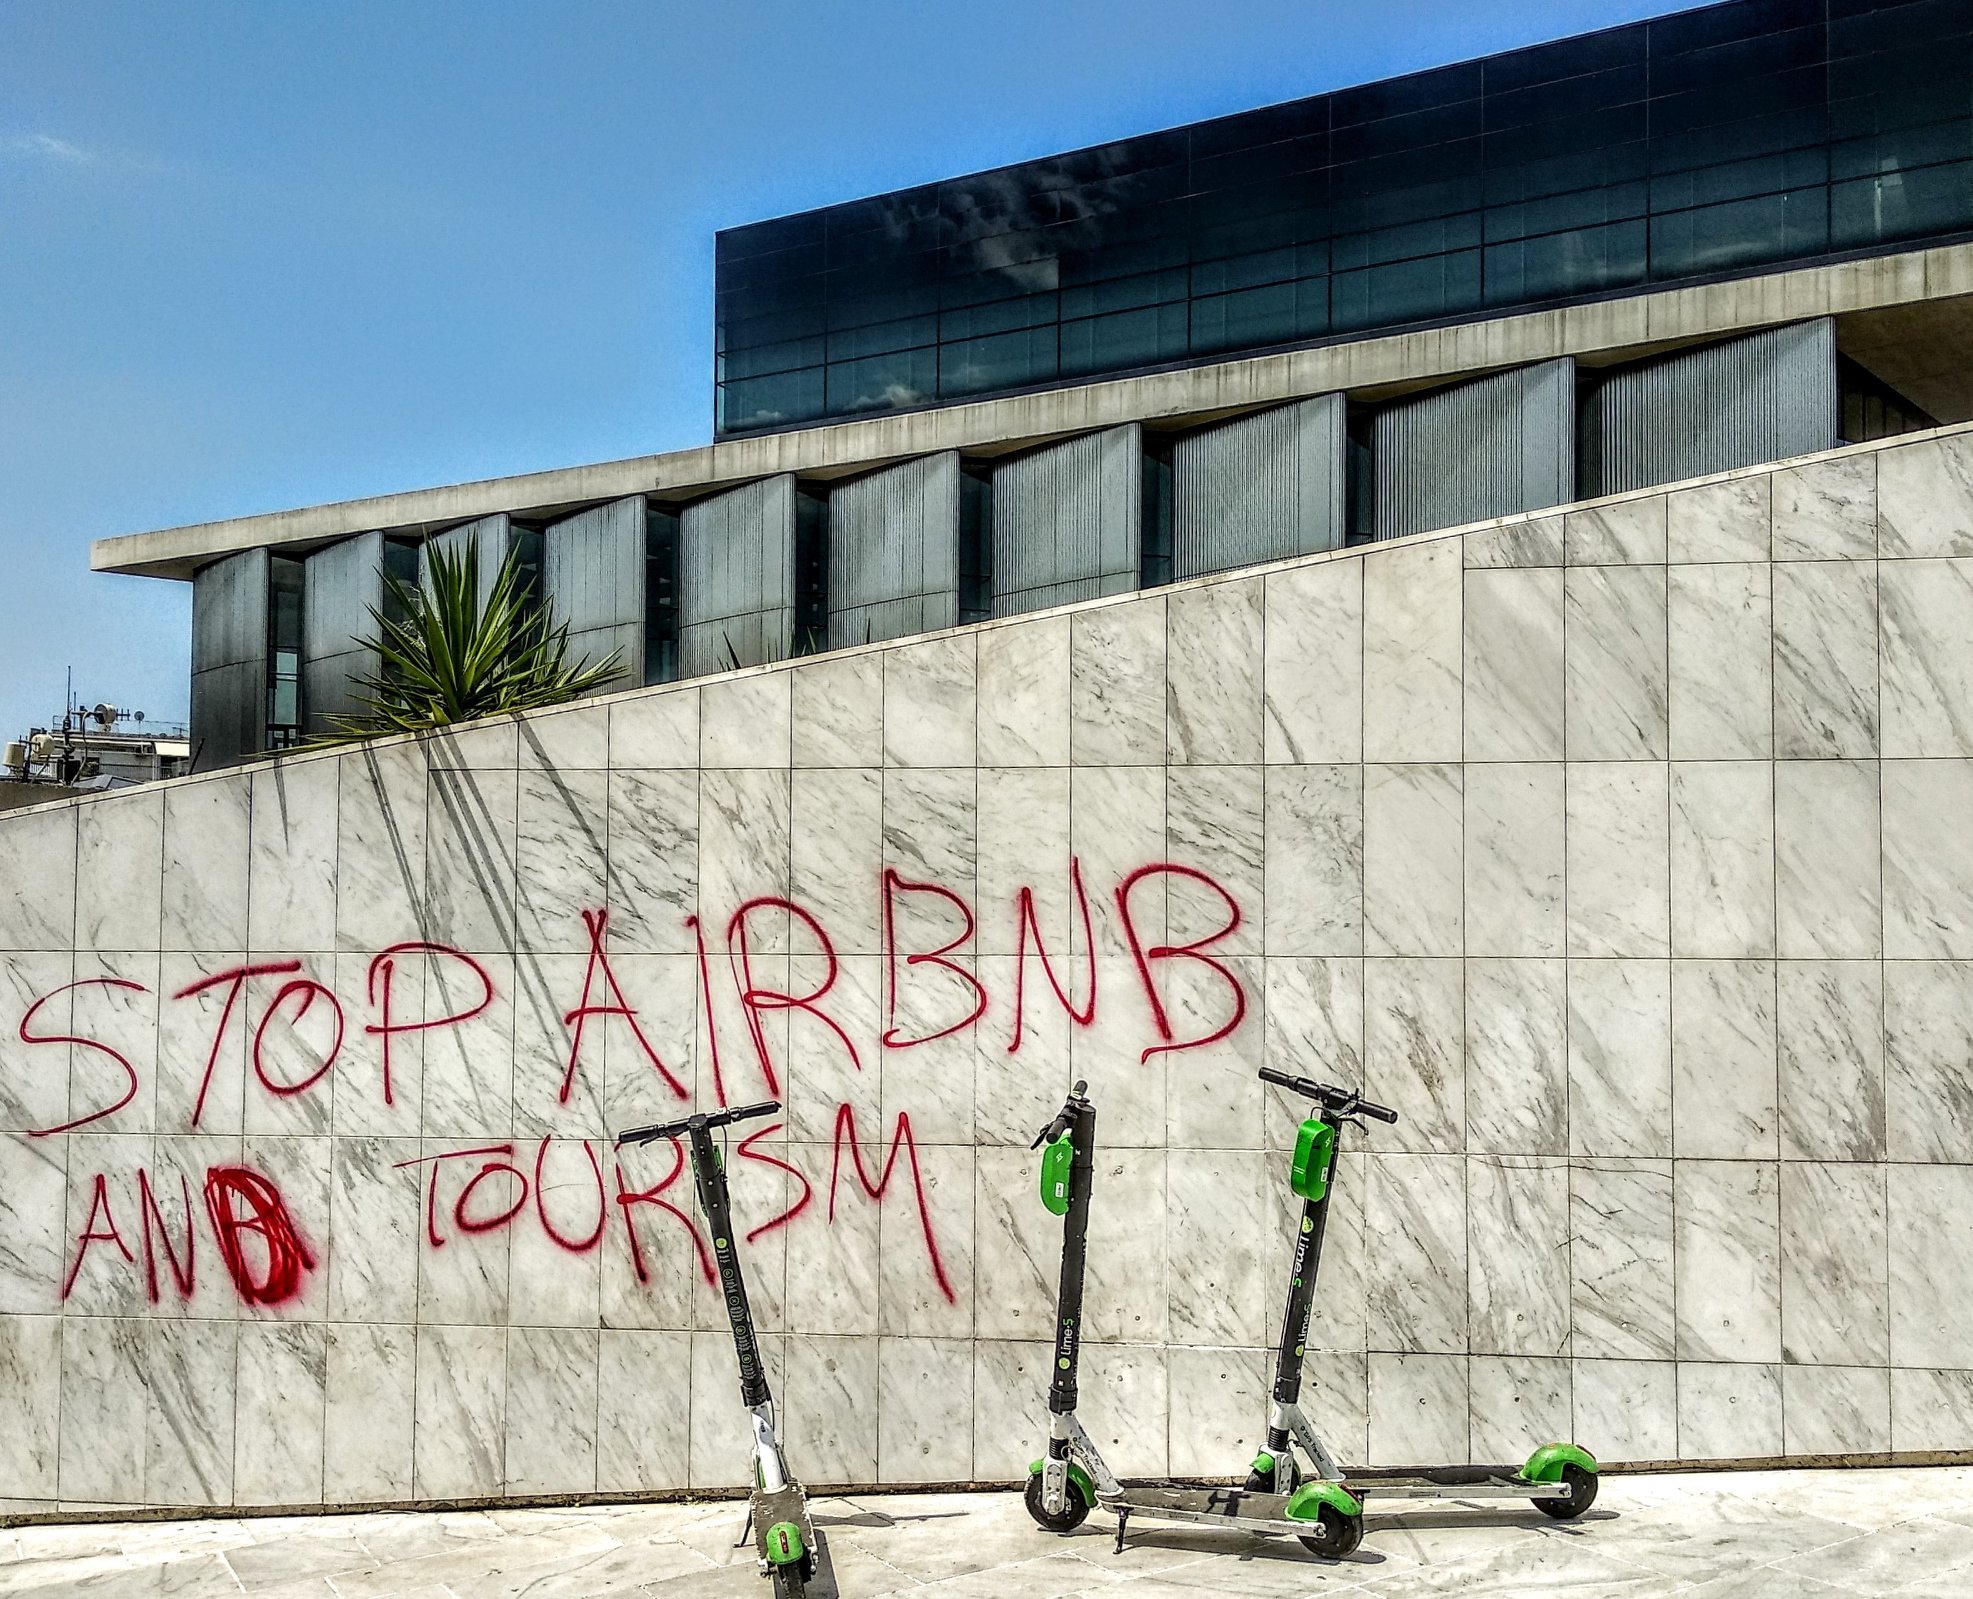 “Tourism owns the hood:” The Emergence of Anti-Airbnb Graffiti in Athens